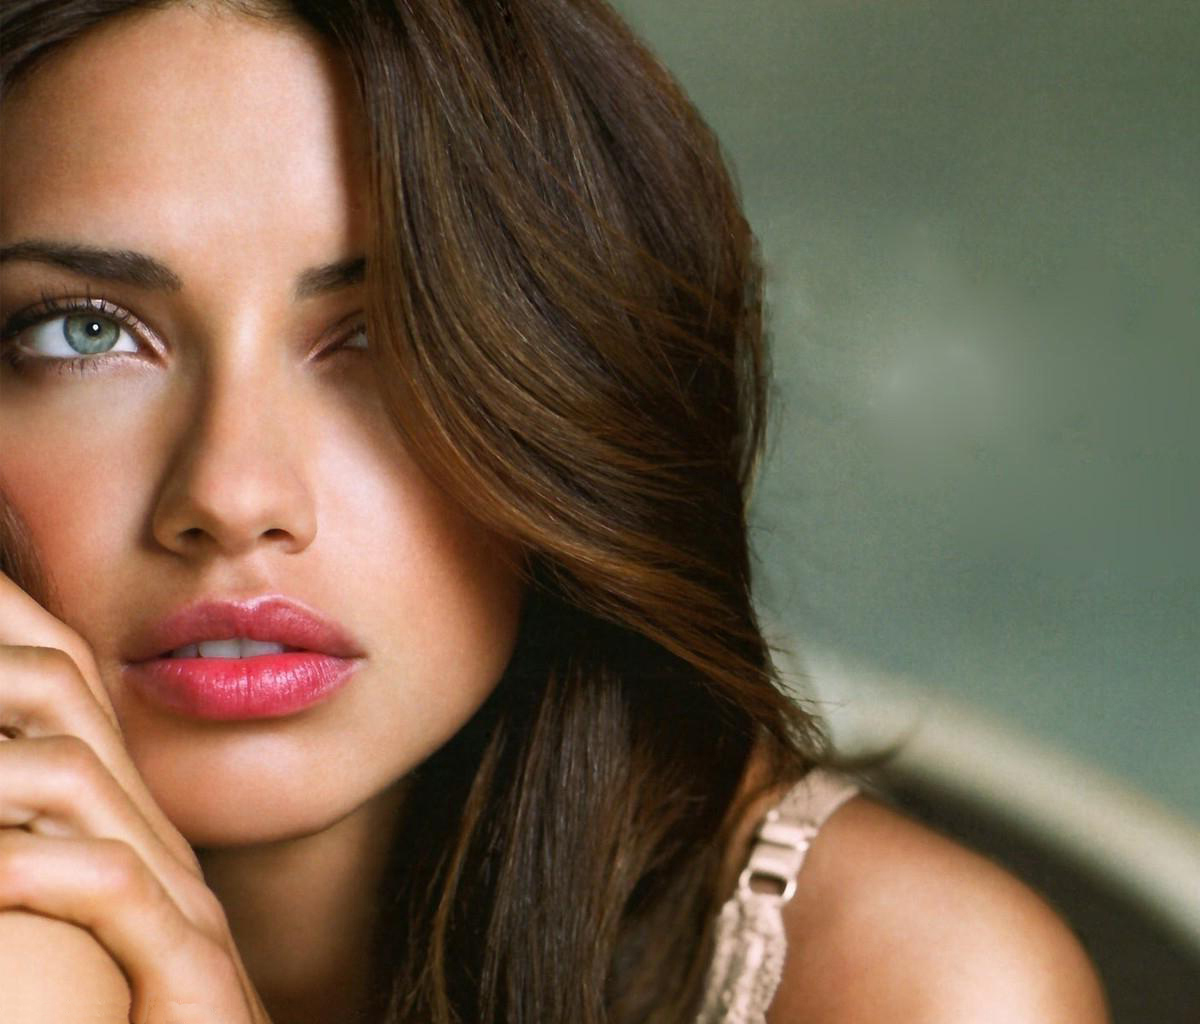 adriana lima hd wallpapers - Free hd wallpapers